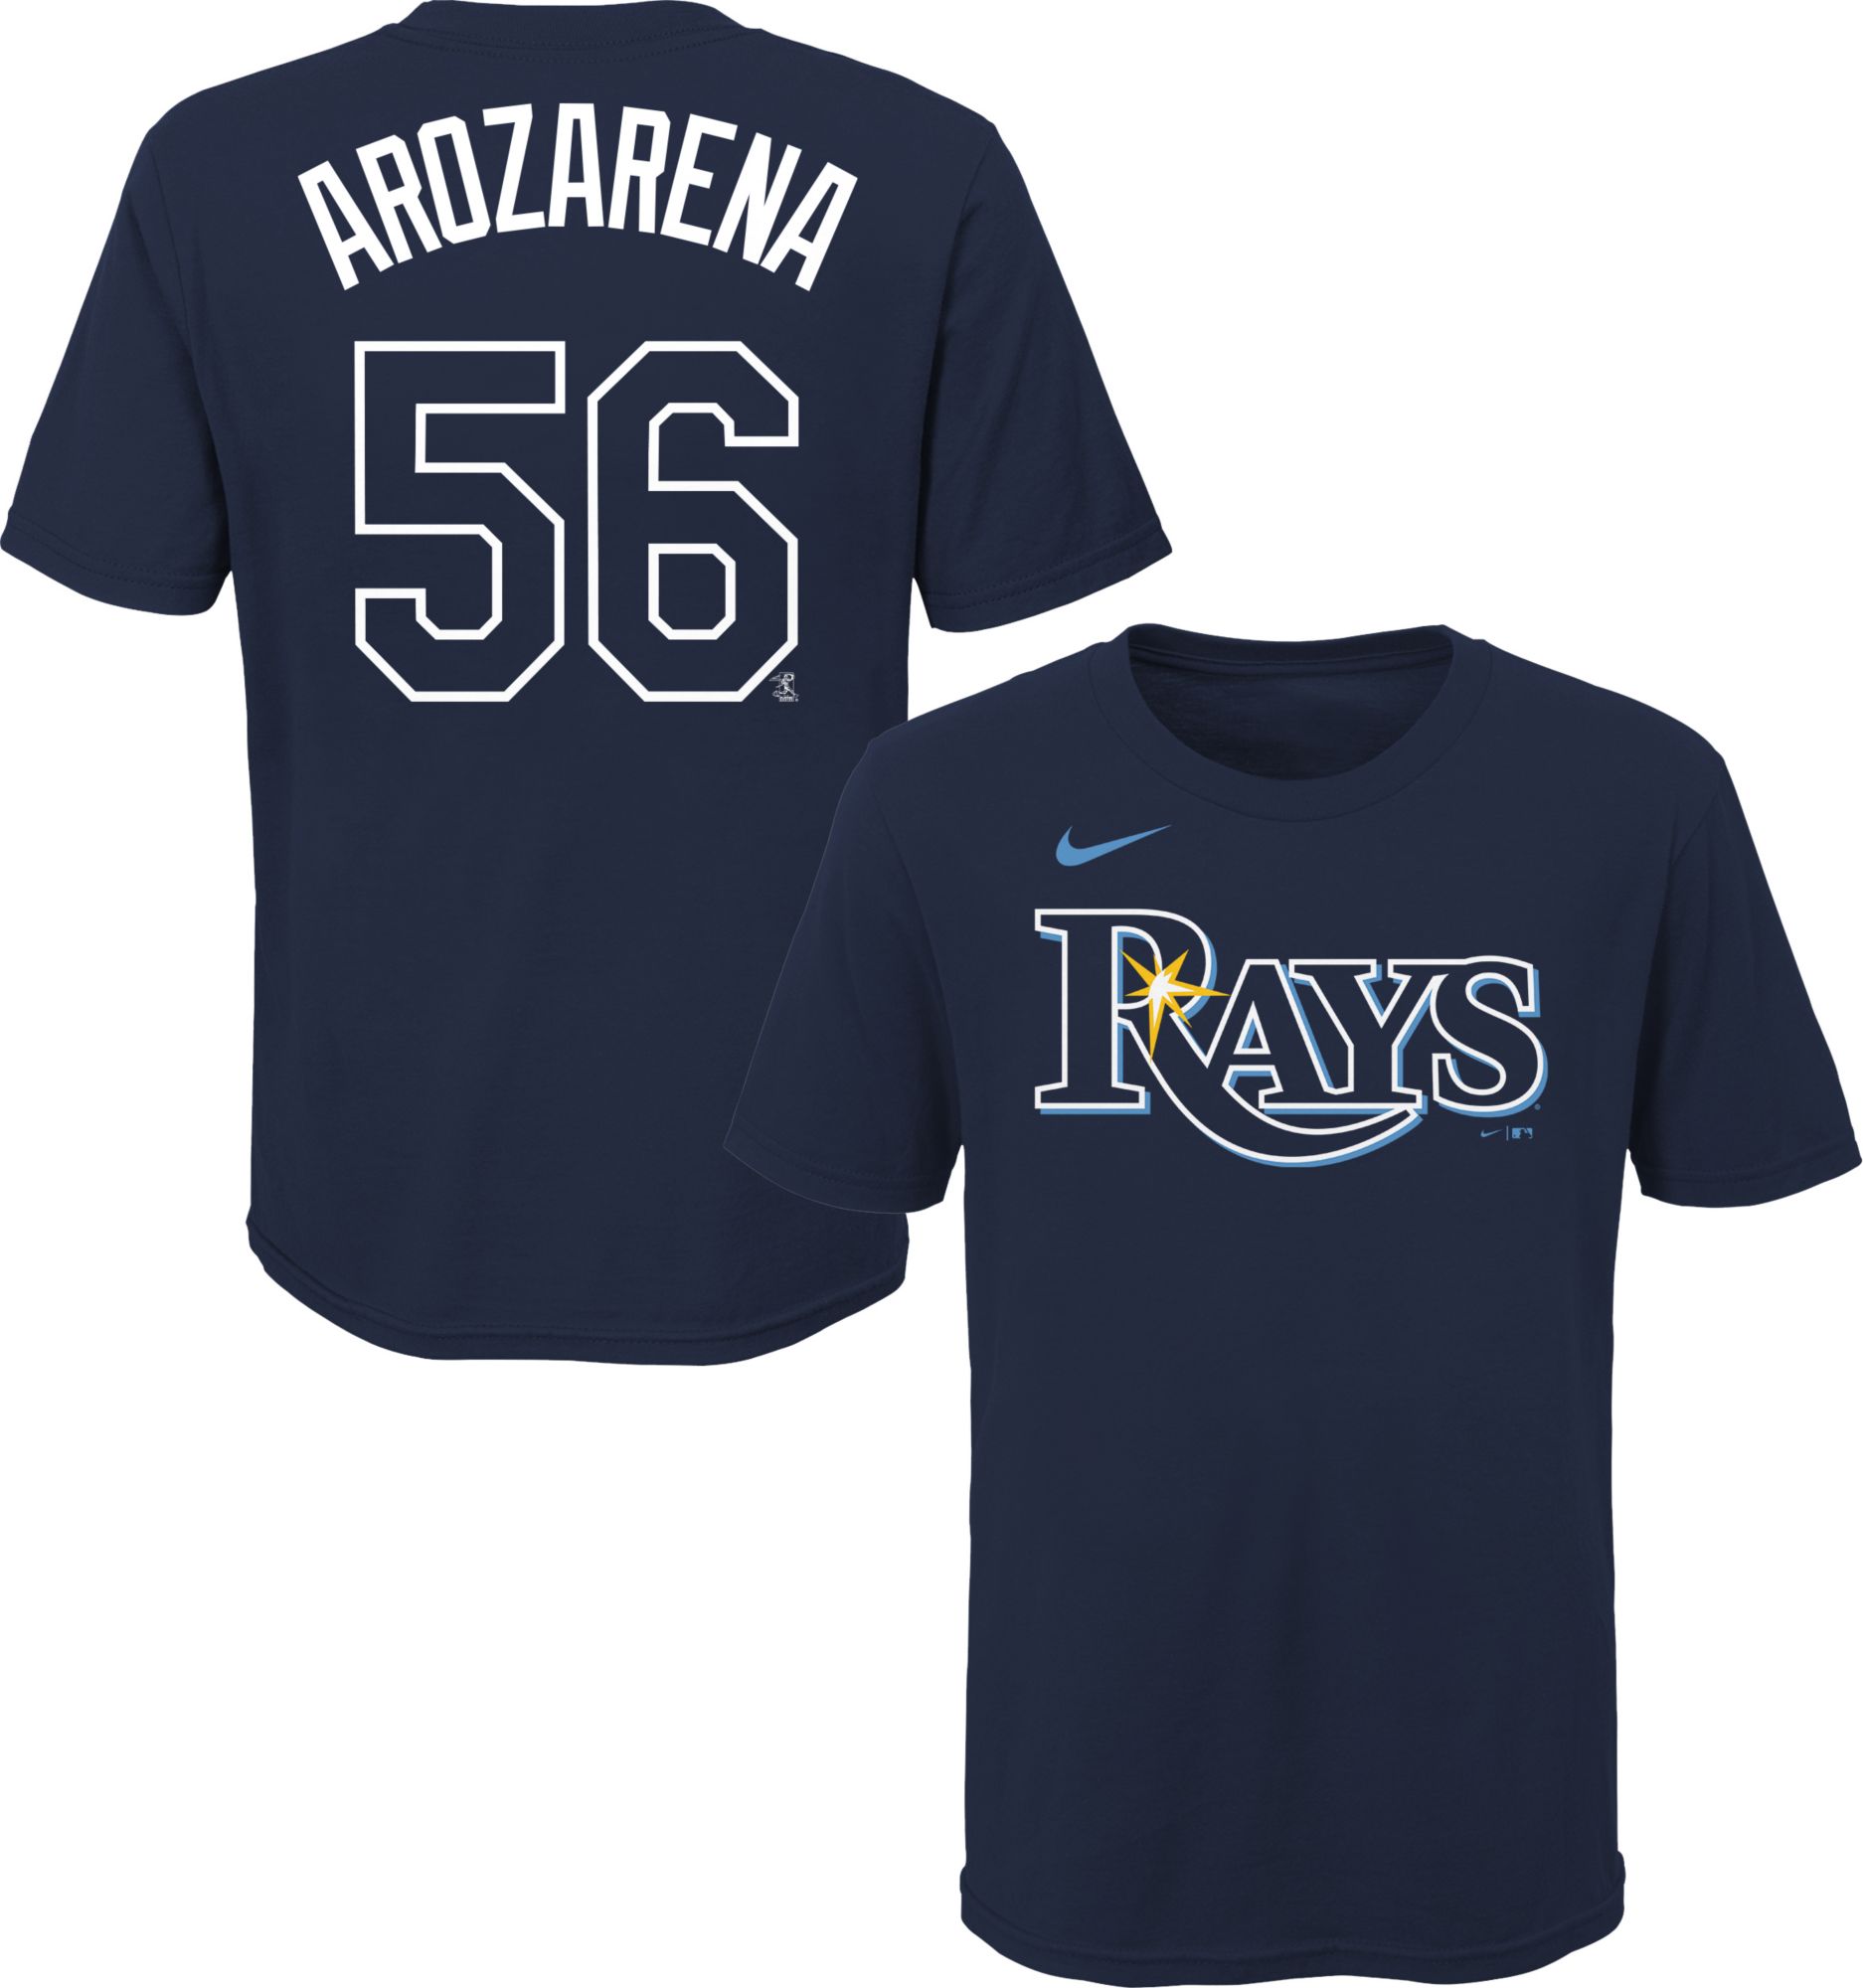 Tampa Bay Rays Kids' Apparel  Curbside Pickup Available at DICK'S